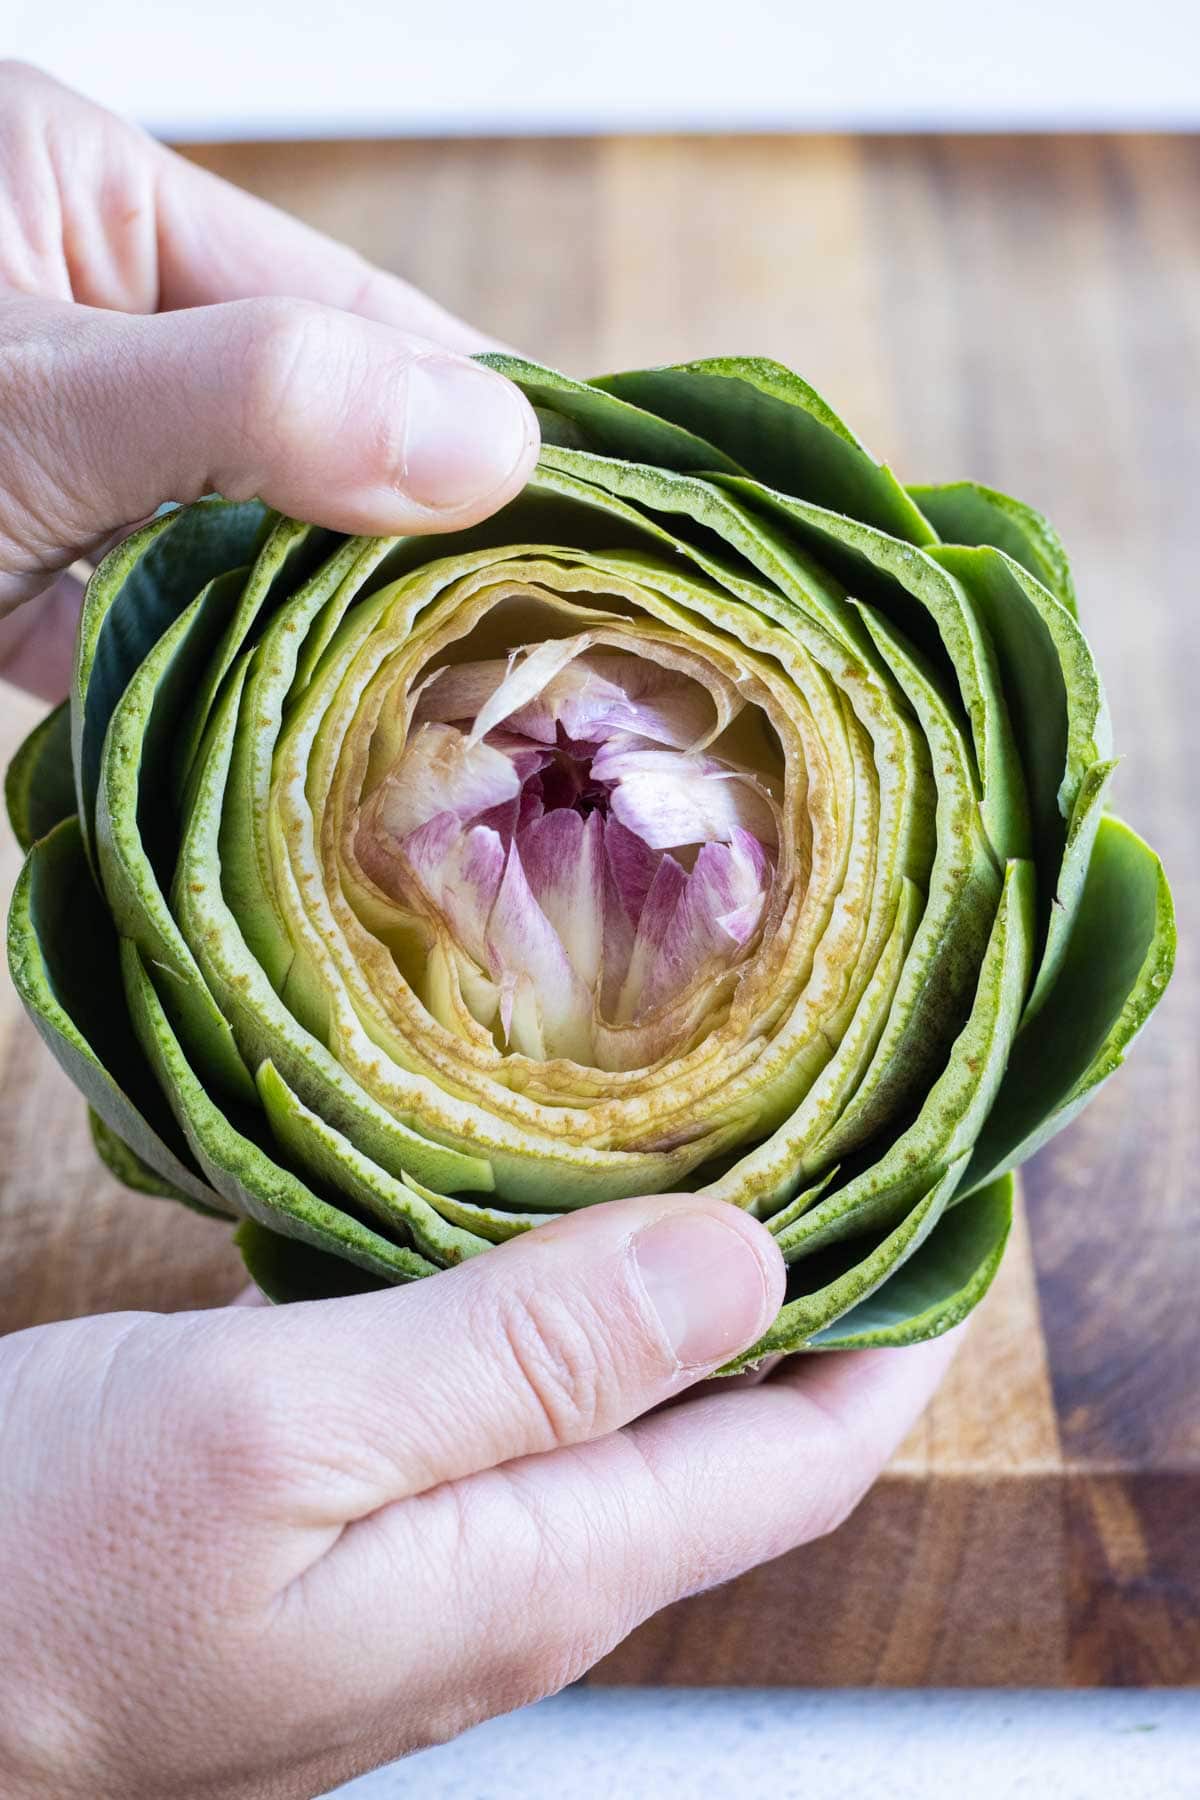 Both hands are used to pry apart the artichoke until you see the heart.